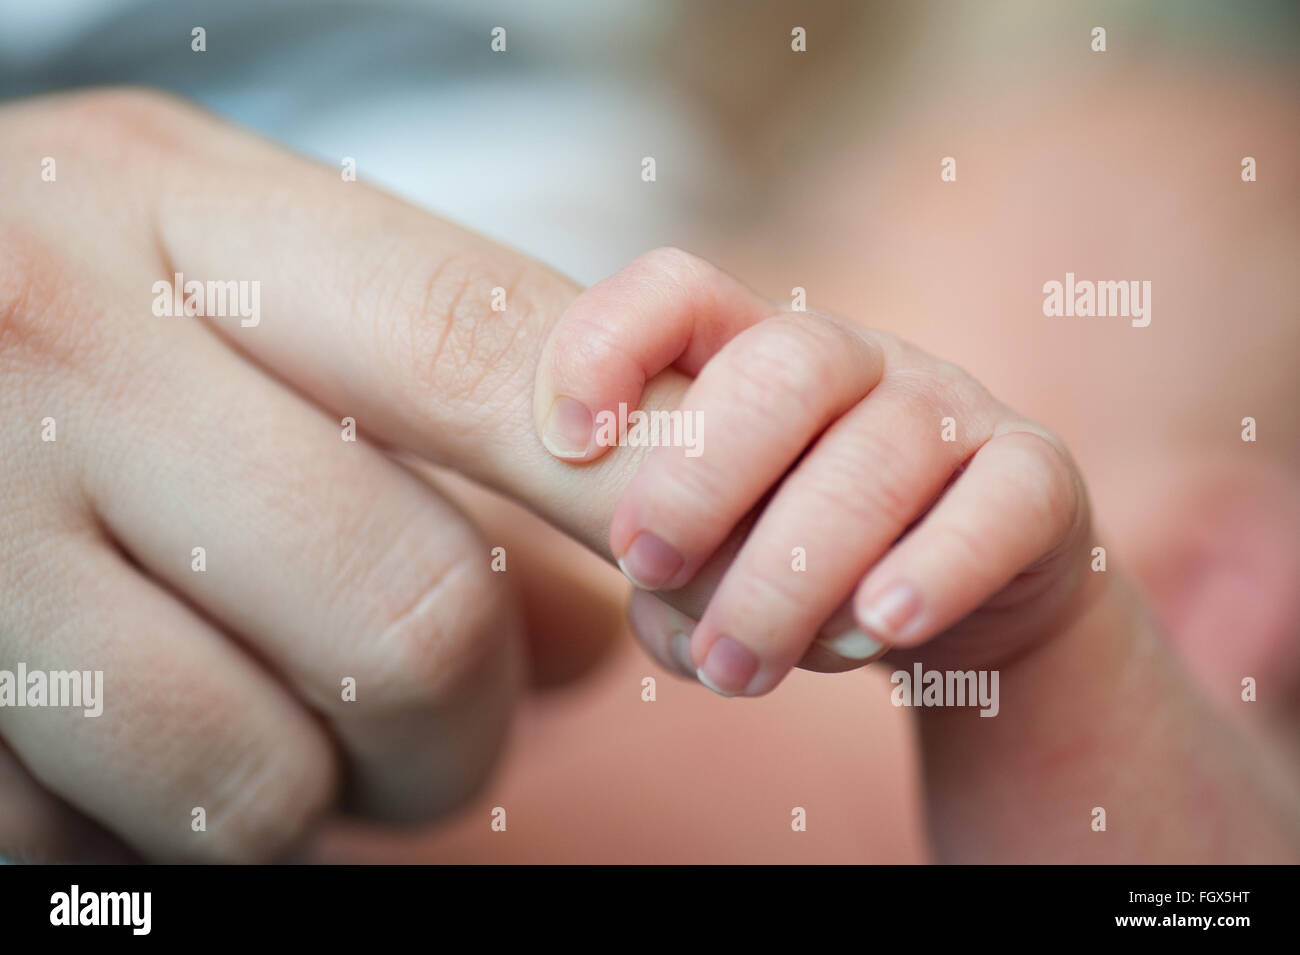 Close-up of baby's hand holding mother's finger avec tendresse Banque D'Images